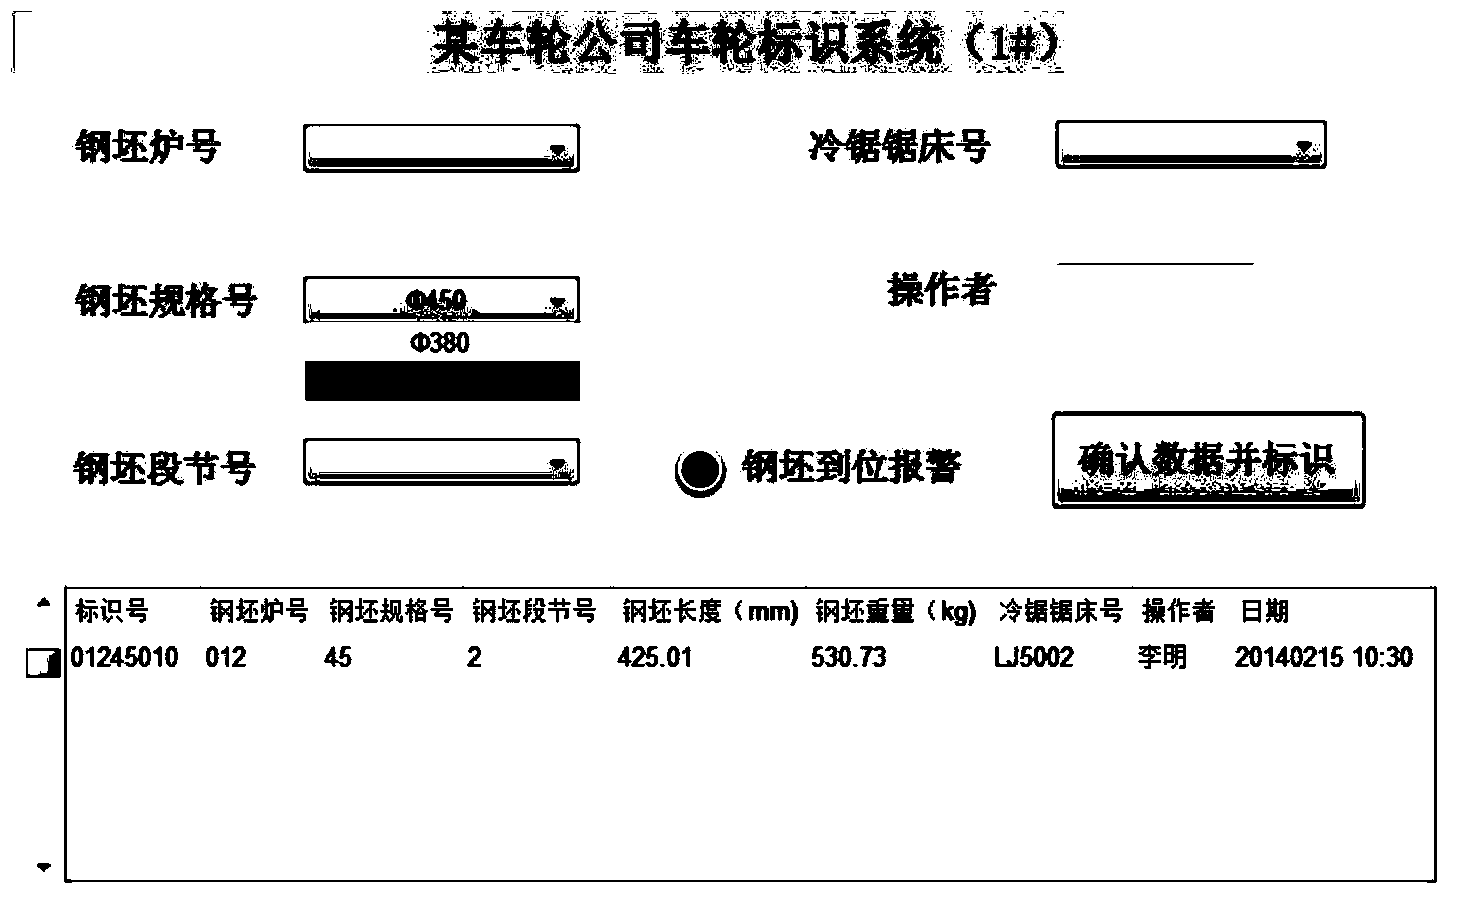 Identifying system and method for billets on blanking production line of train wheels